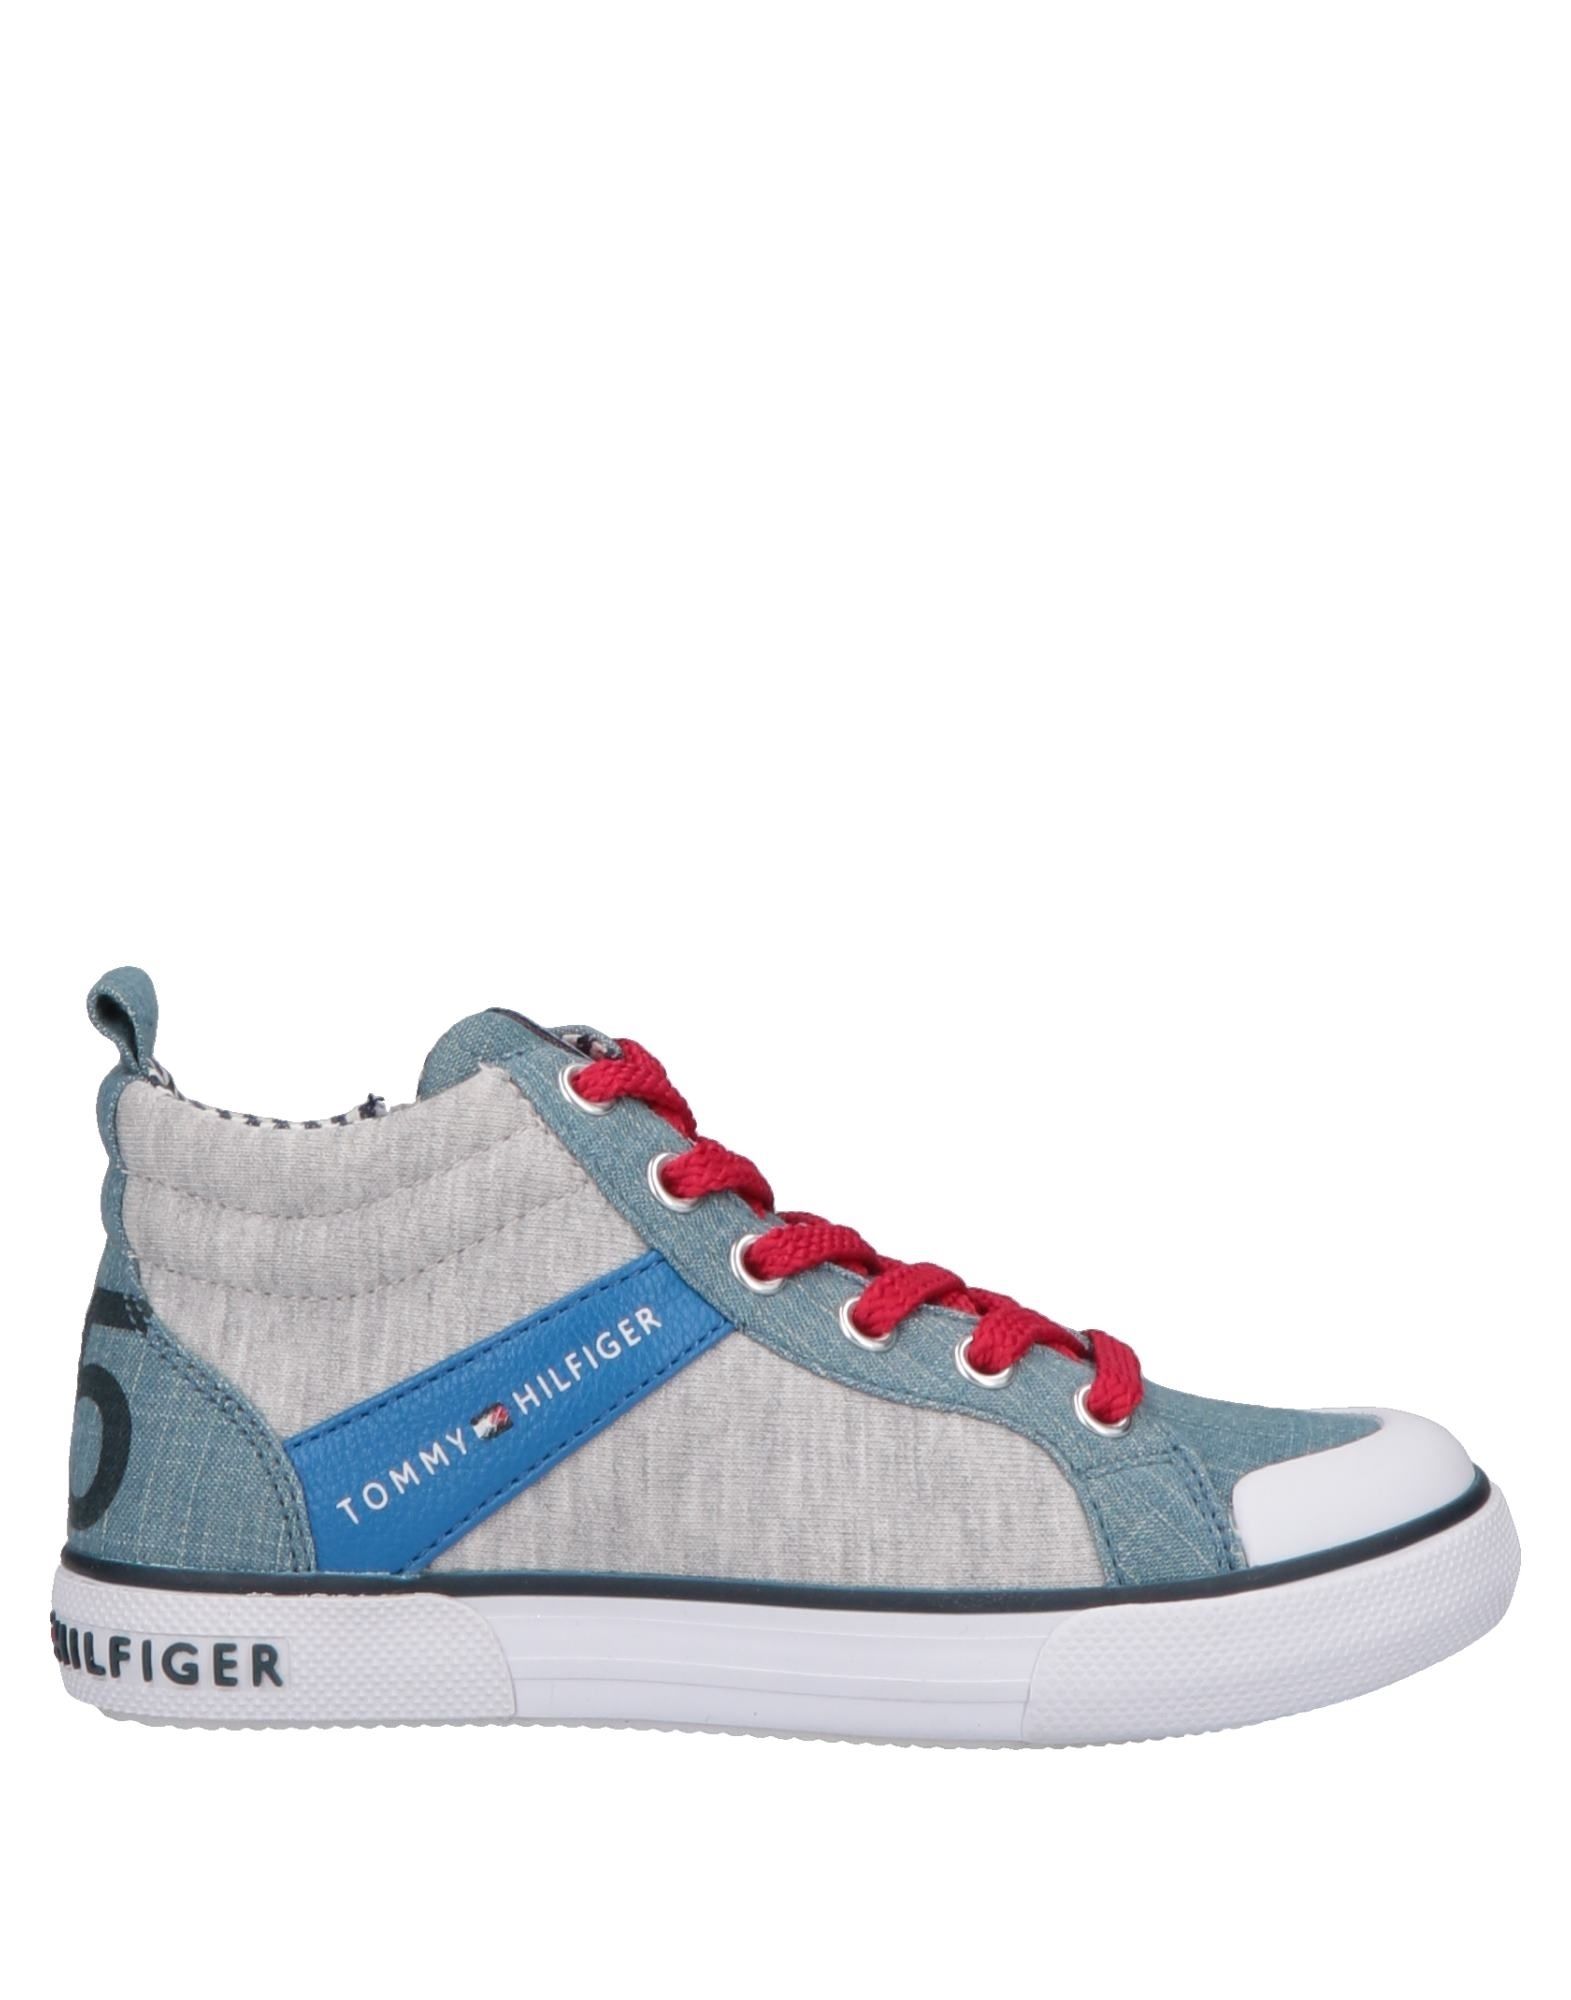 yoox tommy hilfiger shoes